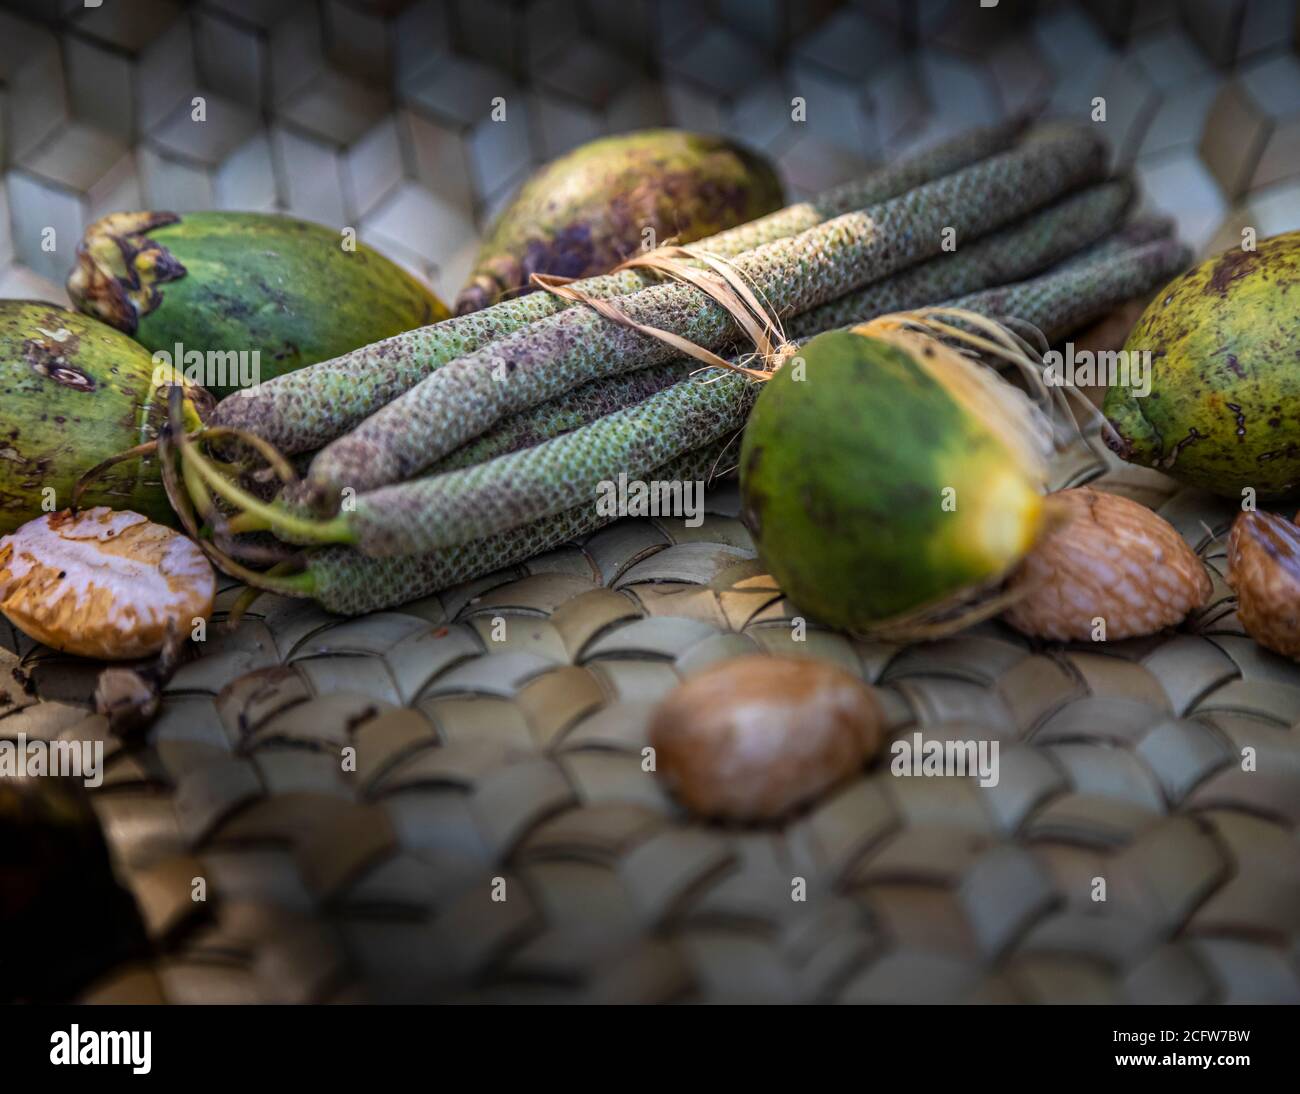 Betel bites consist of betel nuts, slaked lime, and various spices. Fire and Dragons Cruise of the True North, Sunda Islands, Indonesia Stock Photo